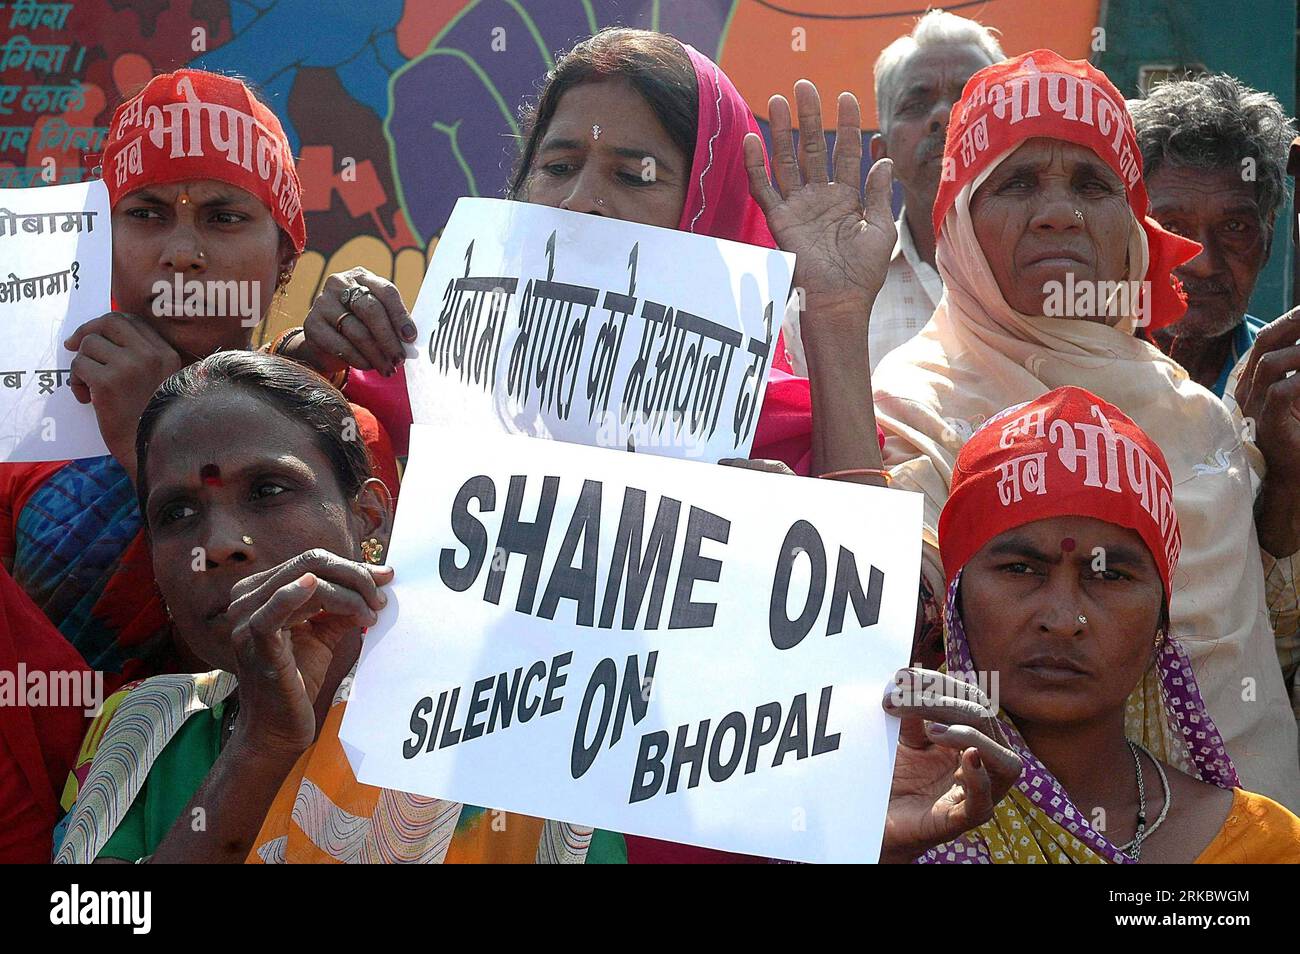 Bildnummer: 54616446  Datum: 06.11.2010  Copyright: imago/Xinhua (101106) -- BHOPAL, Nov. 6, 2010 (Xinhua) -- Survivors of 1984 gas tragedy attend a demonstration in front of Union Carbide factory in Bhopal in Madhya Pradesh, India, on Nov. 6, 2010, protesting against the visit of U.S. President Barack Obama to India and demanding action against U.S. corporations Dow Chemical and Union Carbide and more compensation for gas victims. A deadly gas, Methyl Isocyanate (MIC), leaked from the pesticide plant of Union Carbide India Ltd. on the intervening night of Dec. 2 to 3, 1984, killing nearly 5,0 Stock Photo